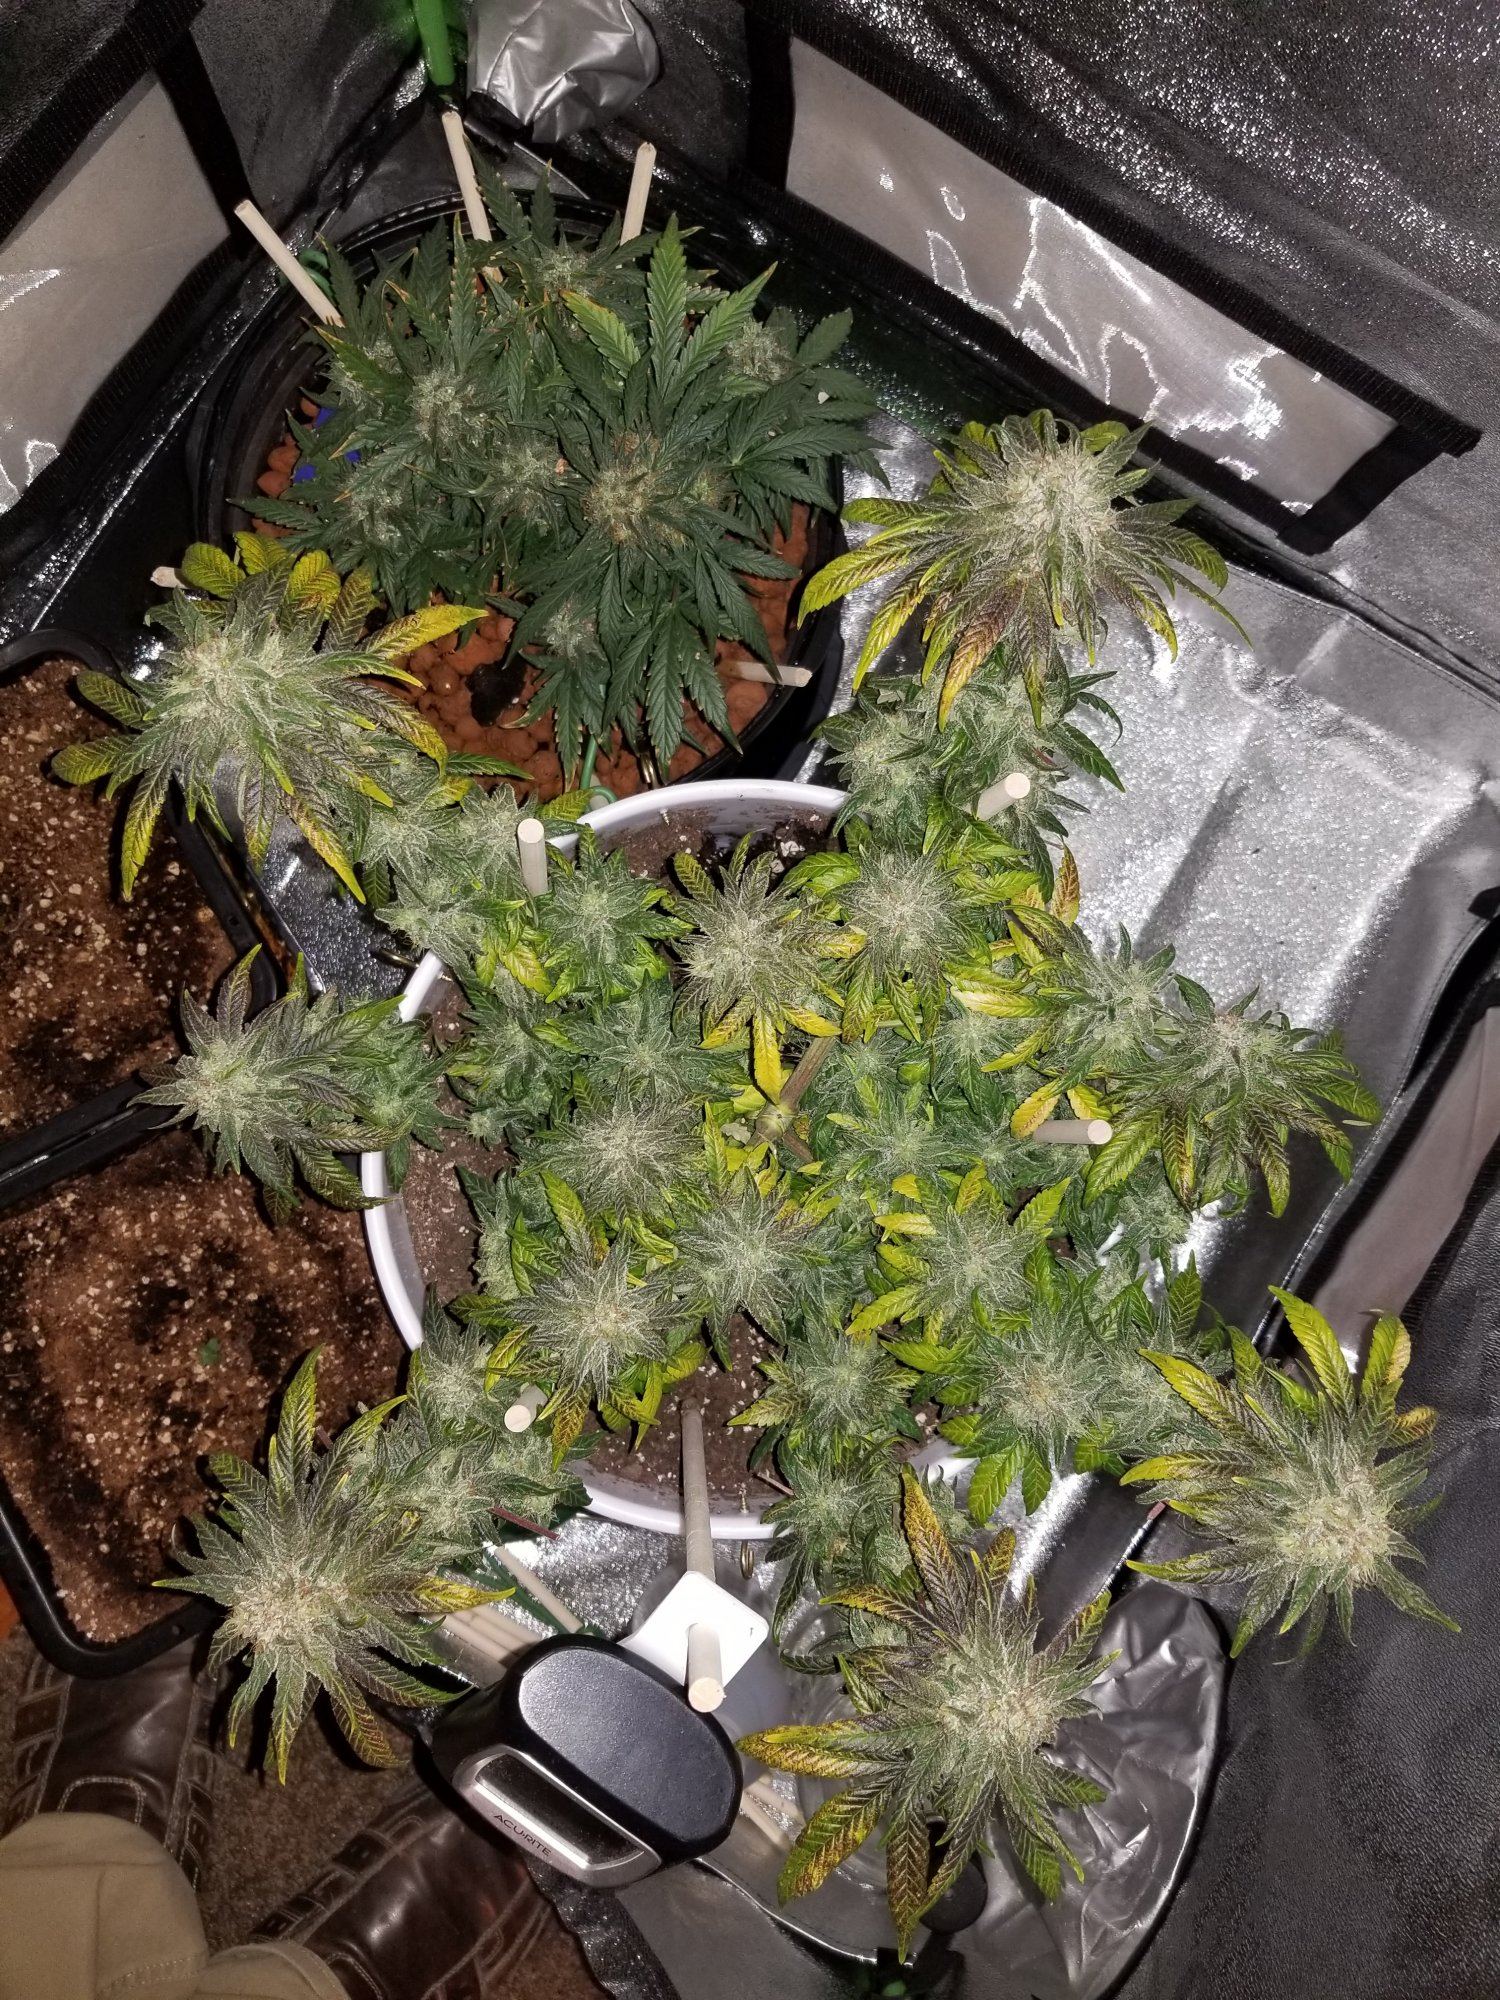 Unknown strain producing genetic foxtails 2